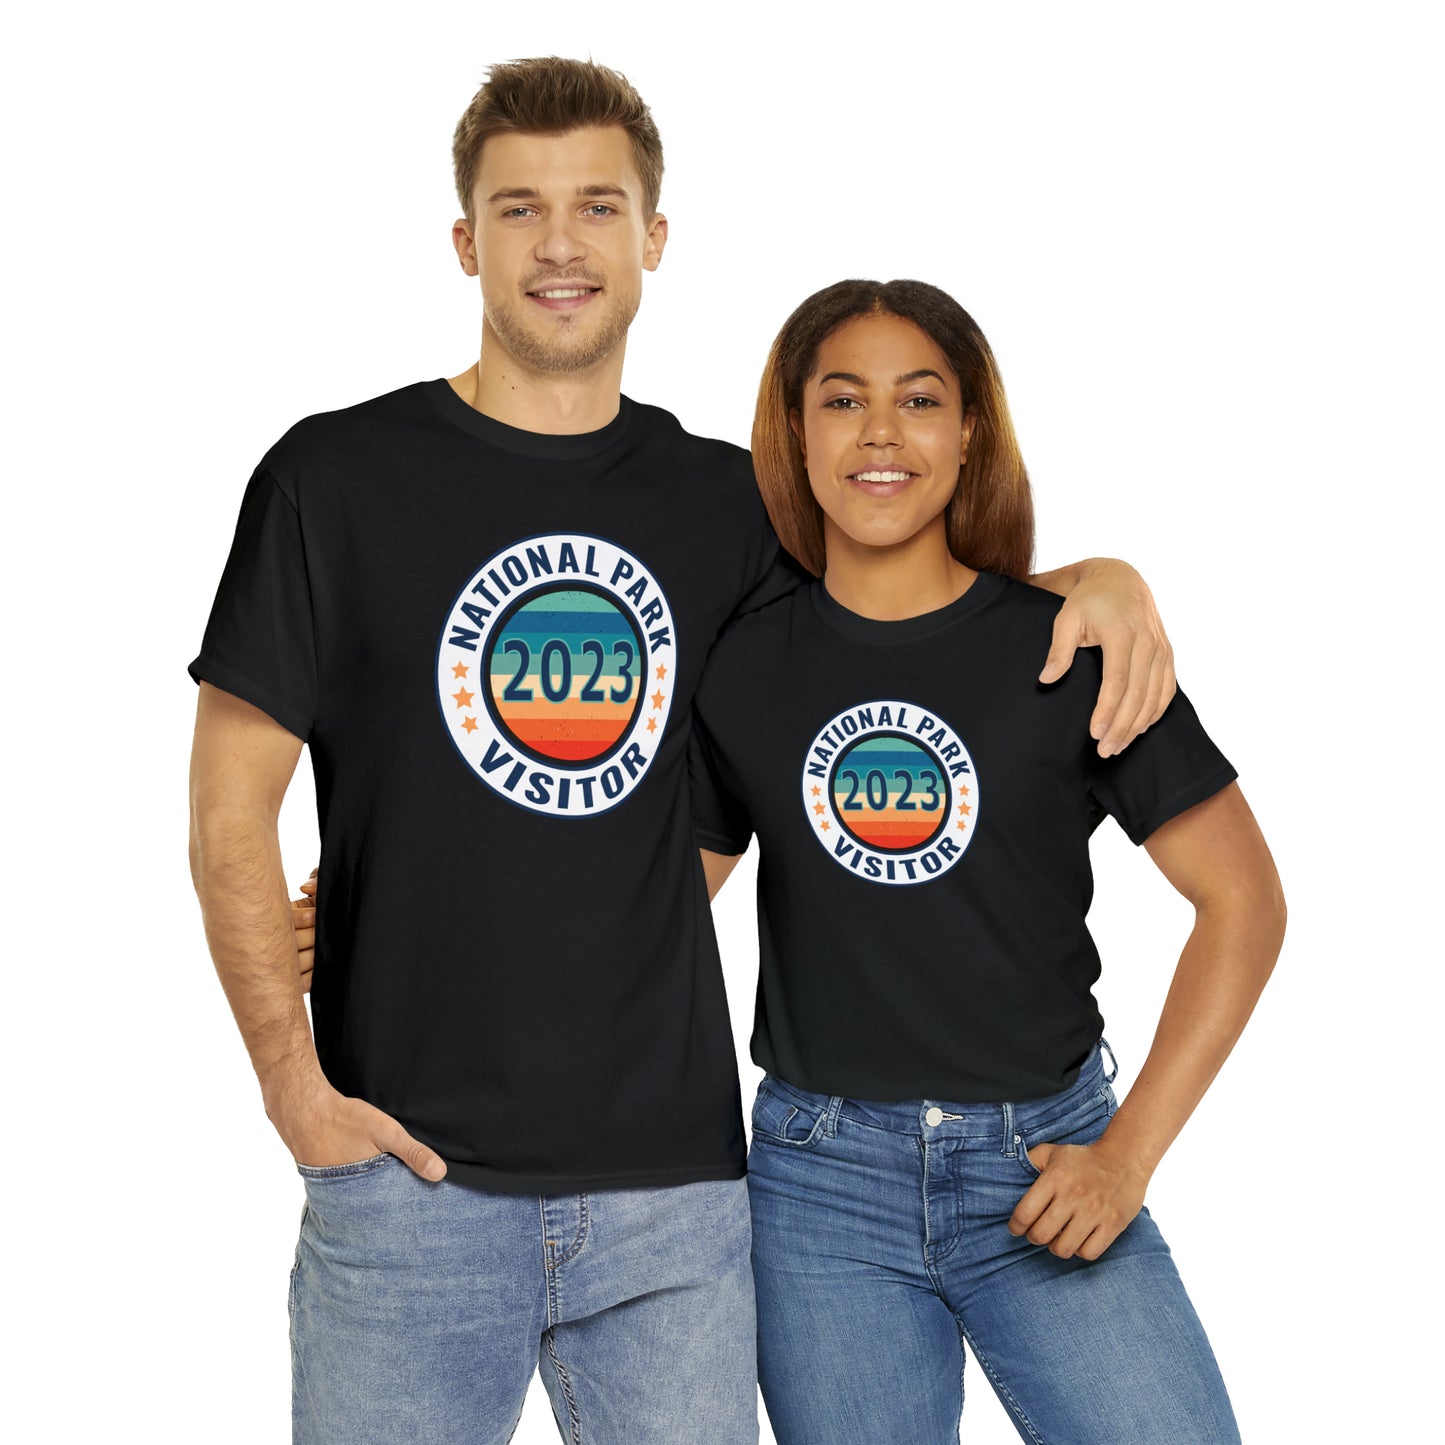 National Park Visitor 2023 - Unisex Heavy Cotton Tee